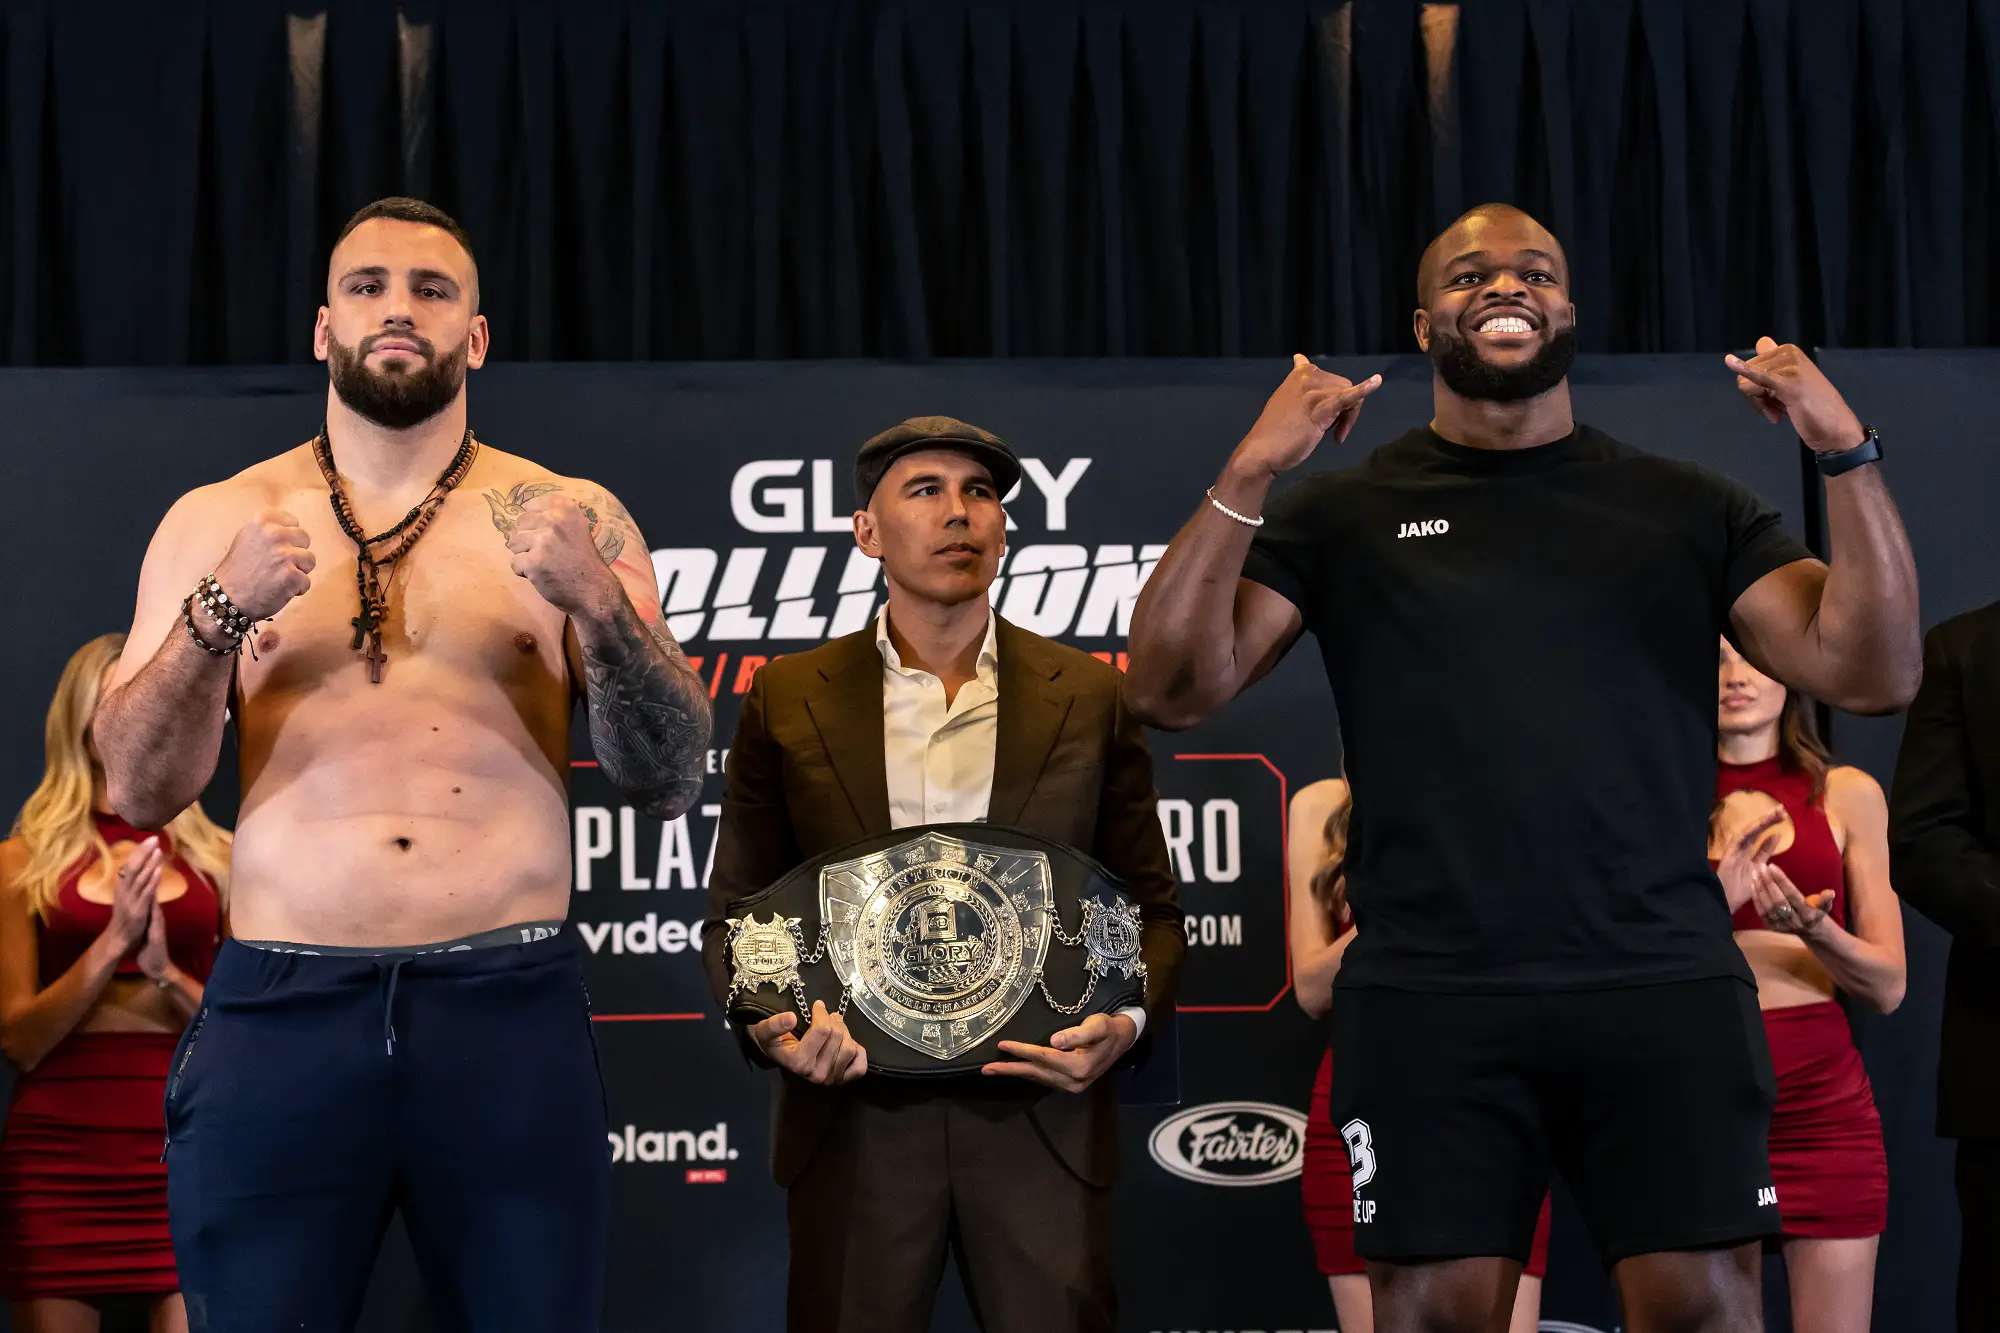 Four Title Fights to go Ahead - GLORY Collision 5 Weigh-ins